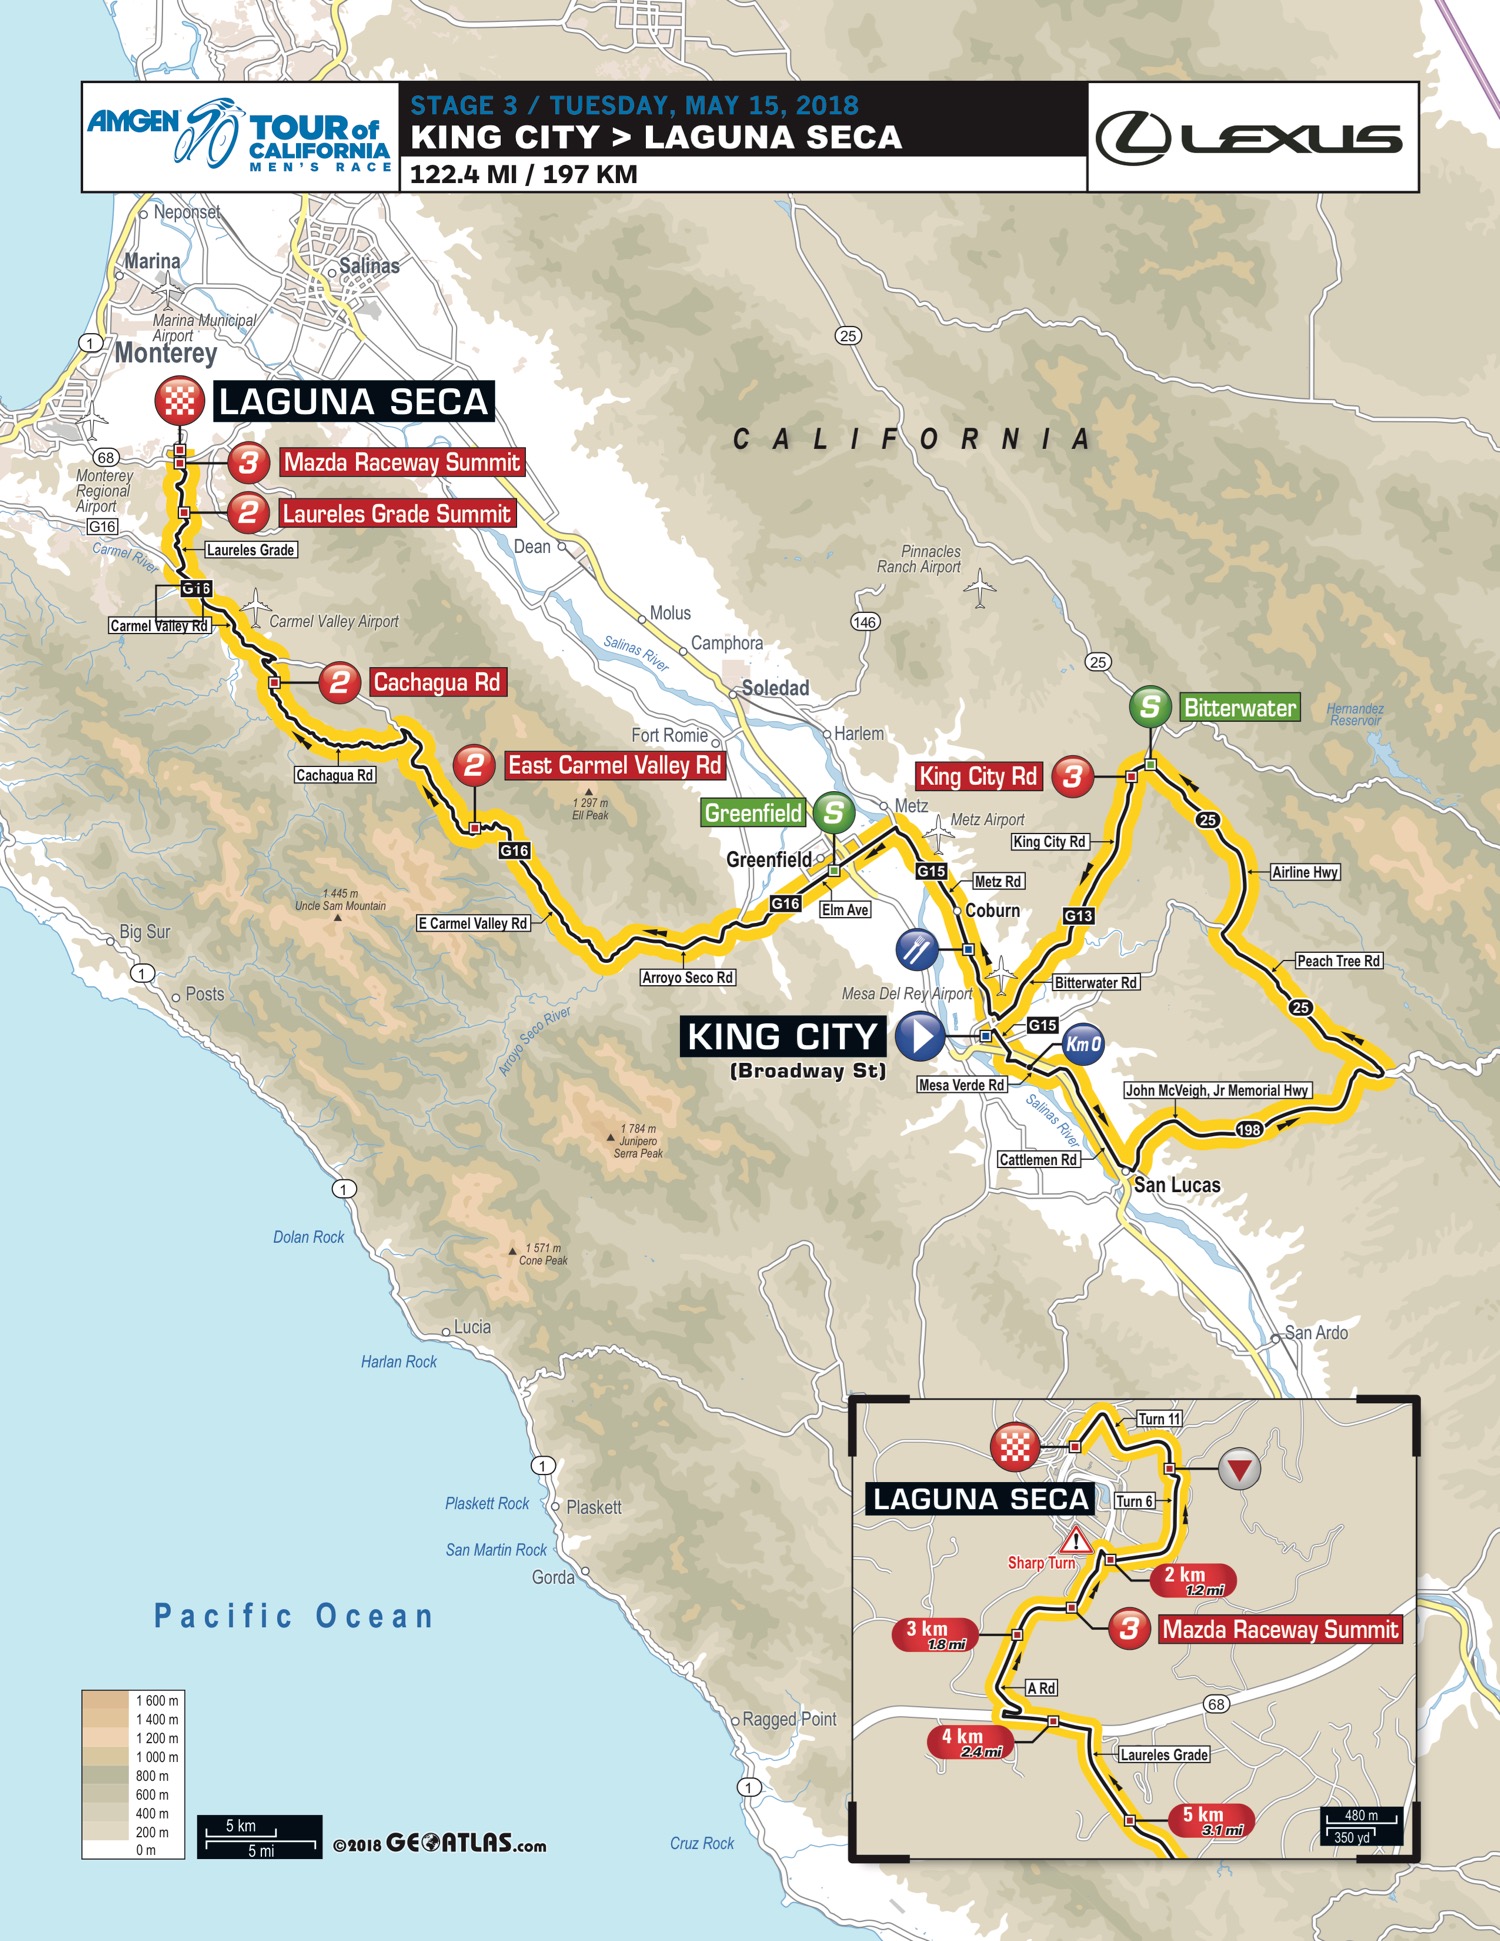 Tour Of California 2018 Stage 3 Map 0ec0a3a403 